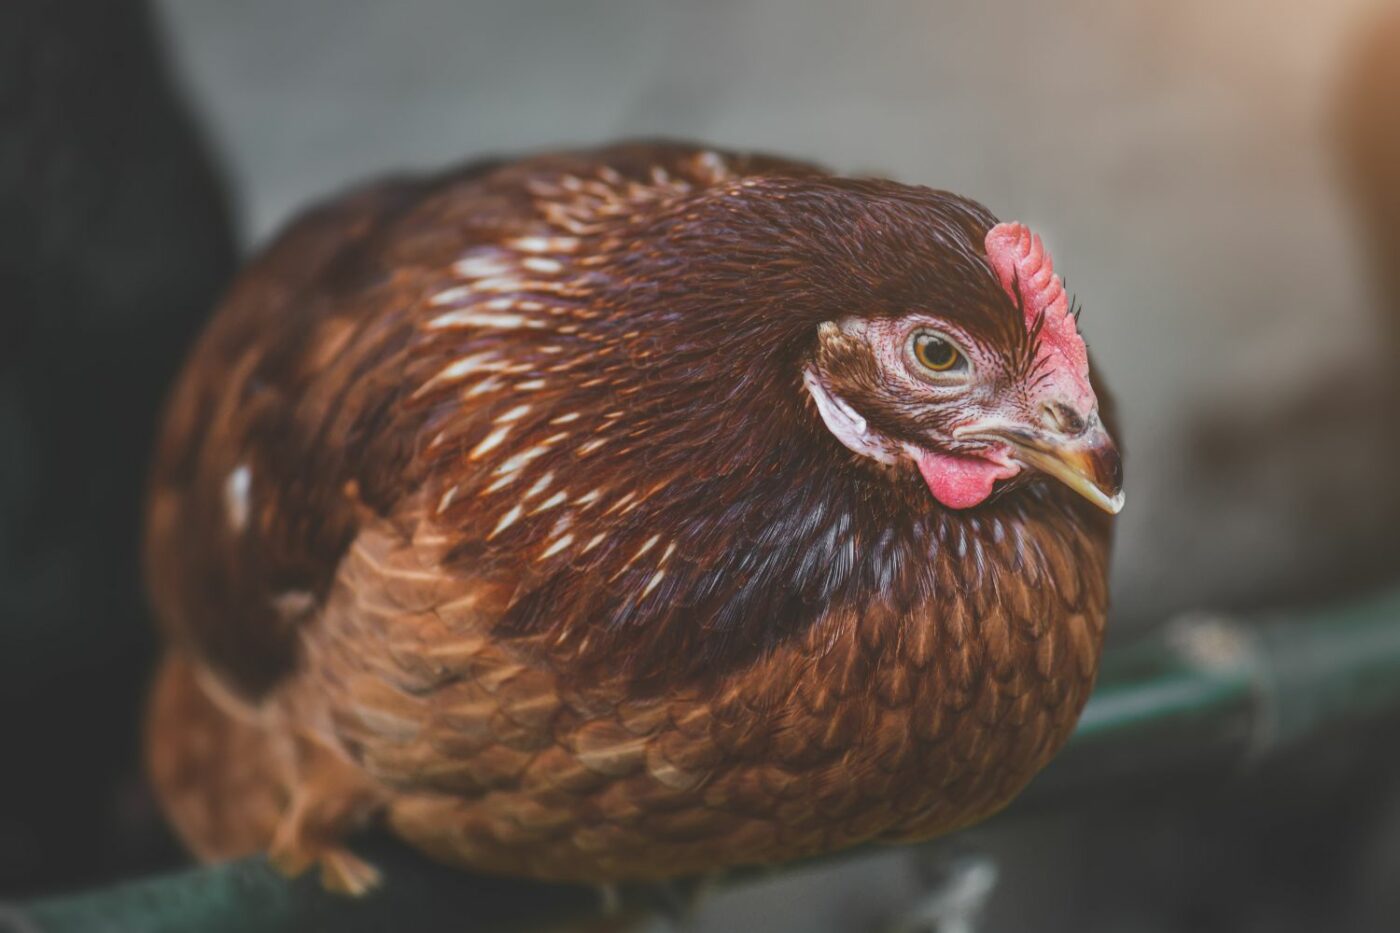 Best Egg Laying Chickens: A List of The 15 Best Chicken Breeds for